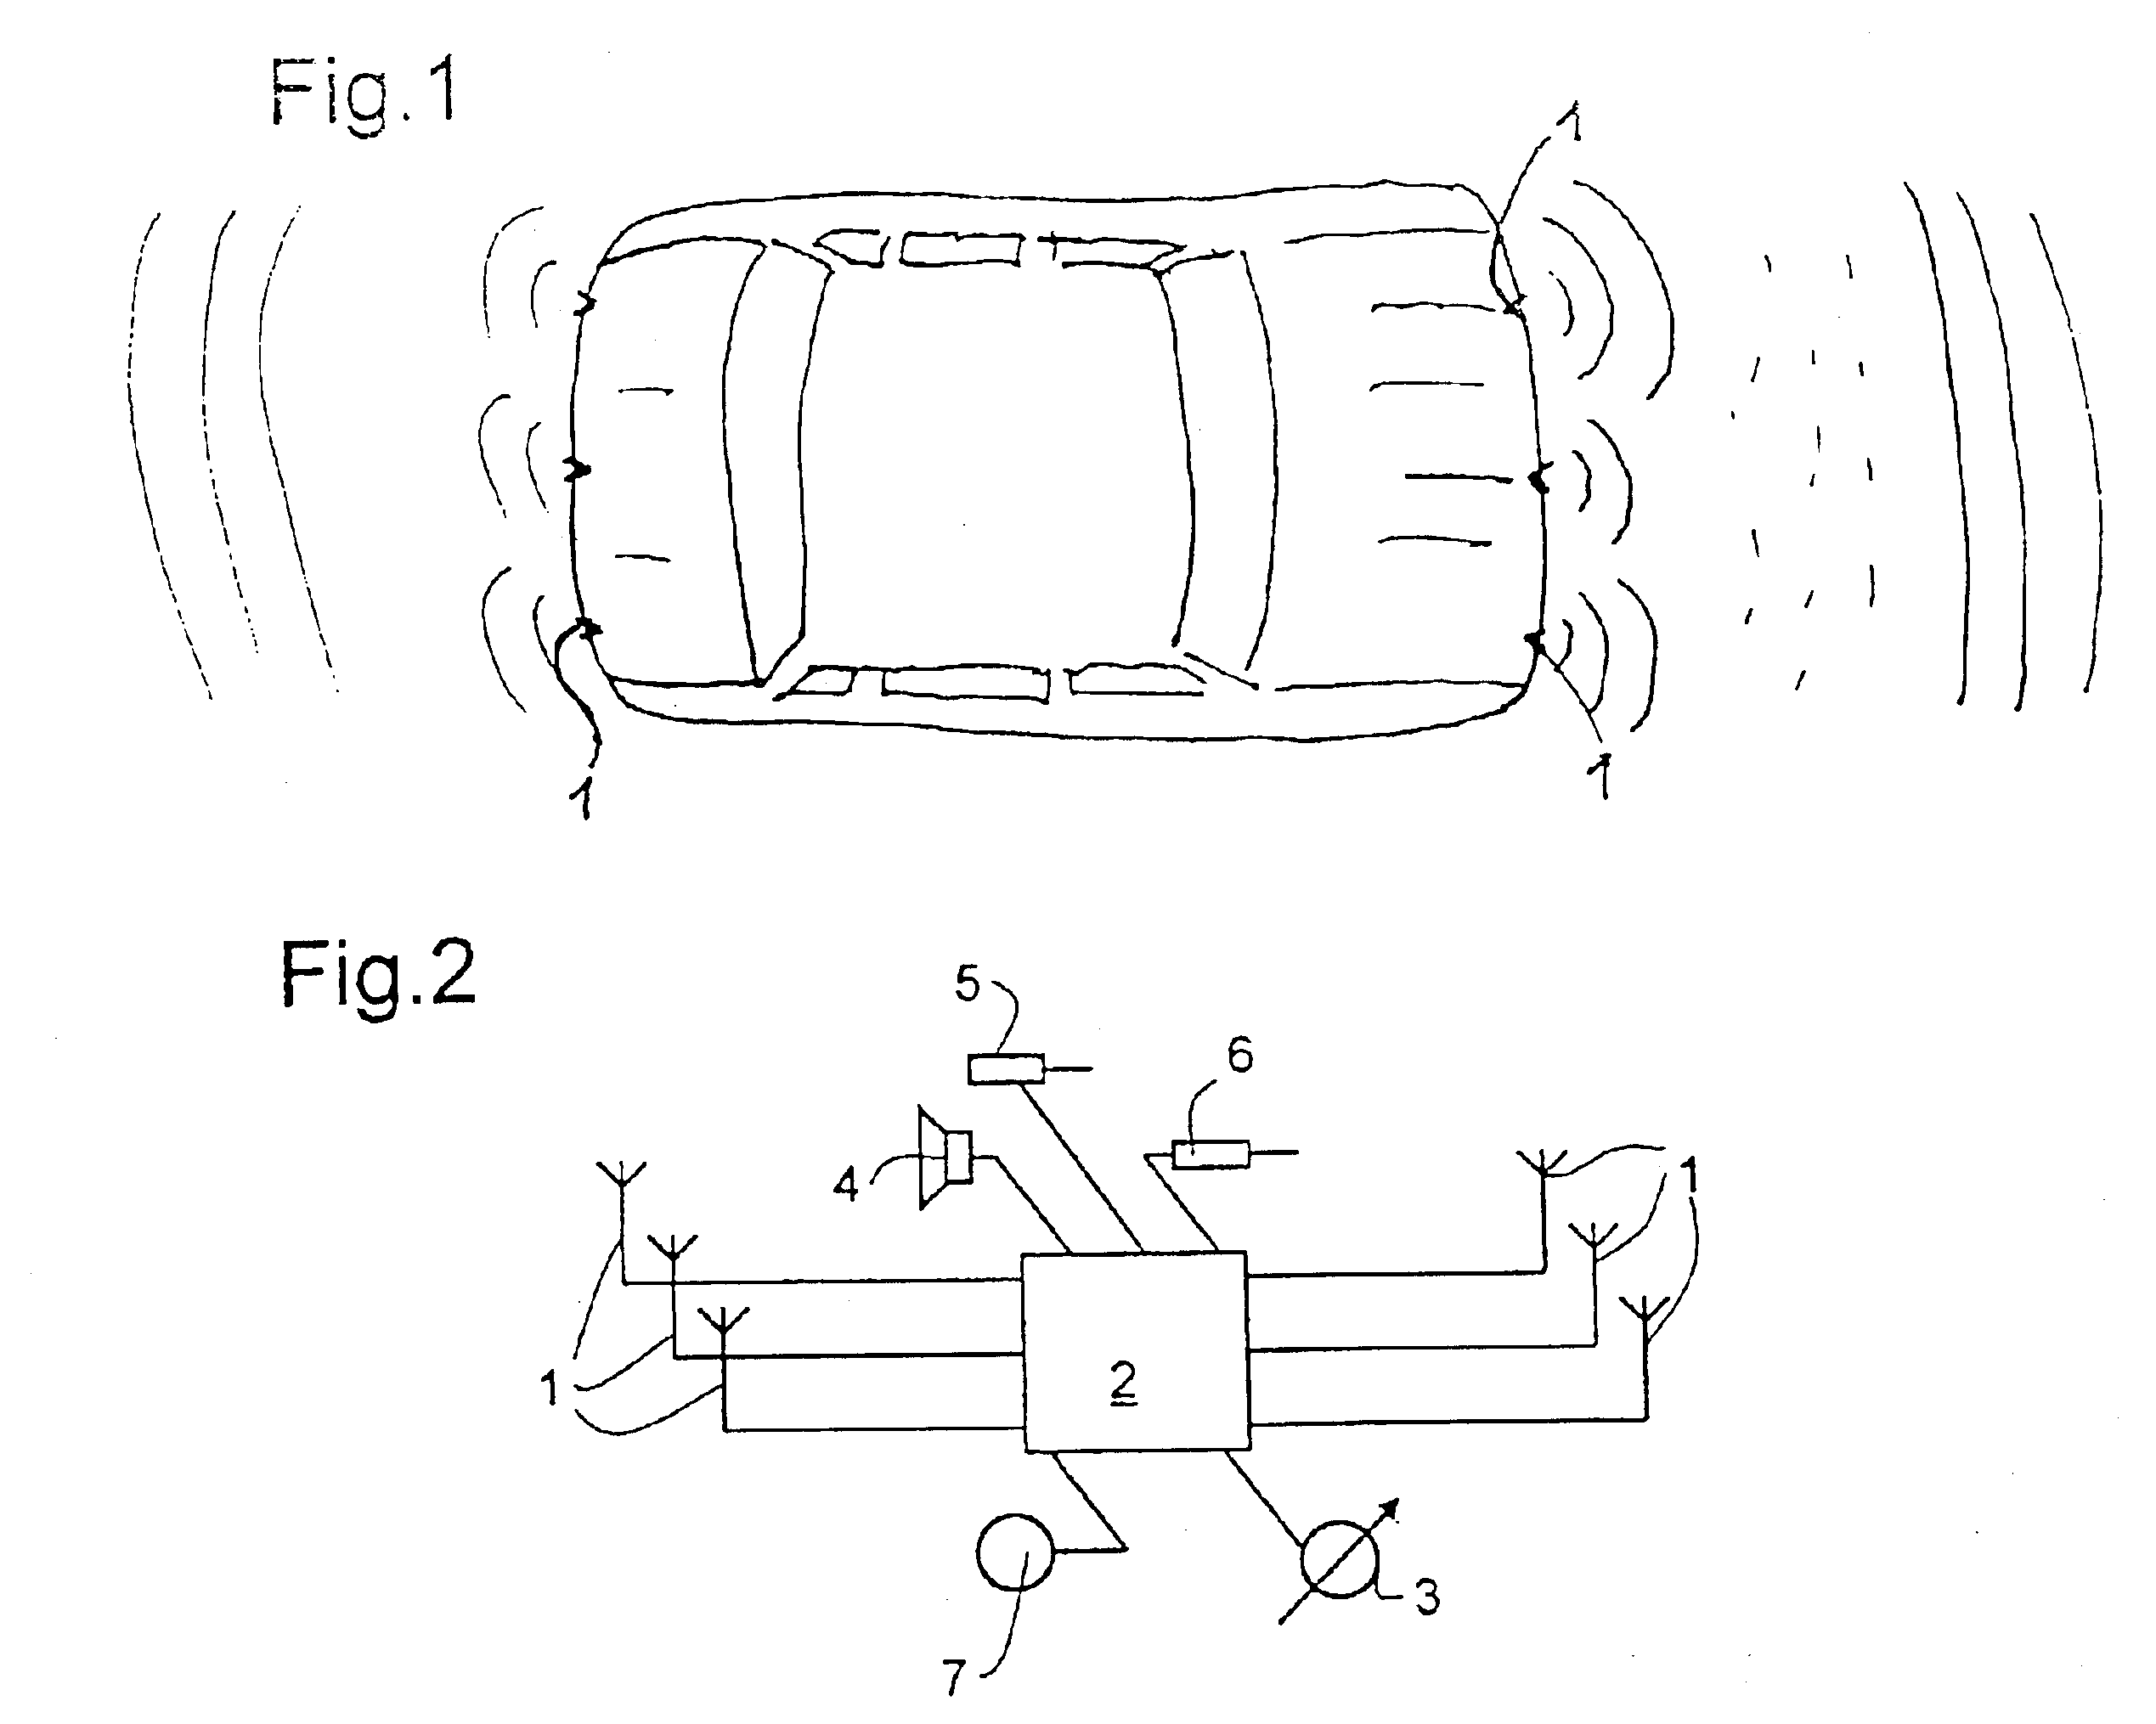 Multi-purpose driver assist system for a motor vehicle